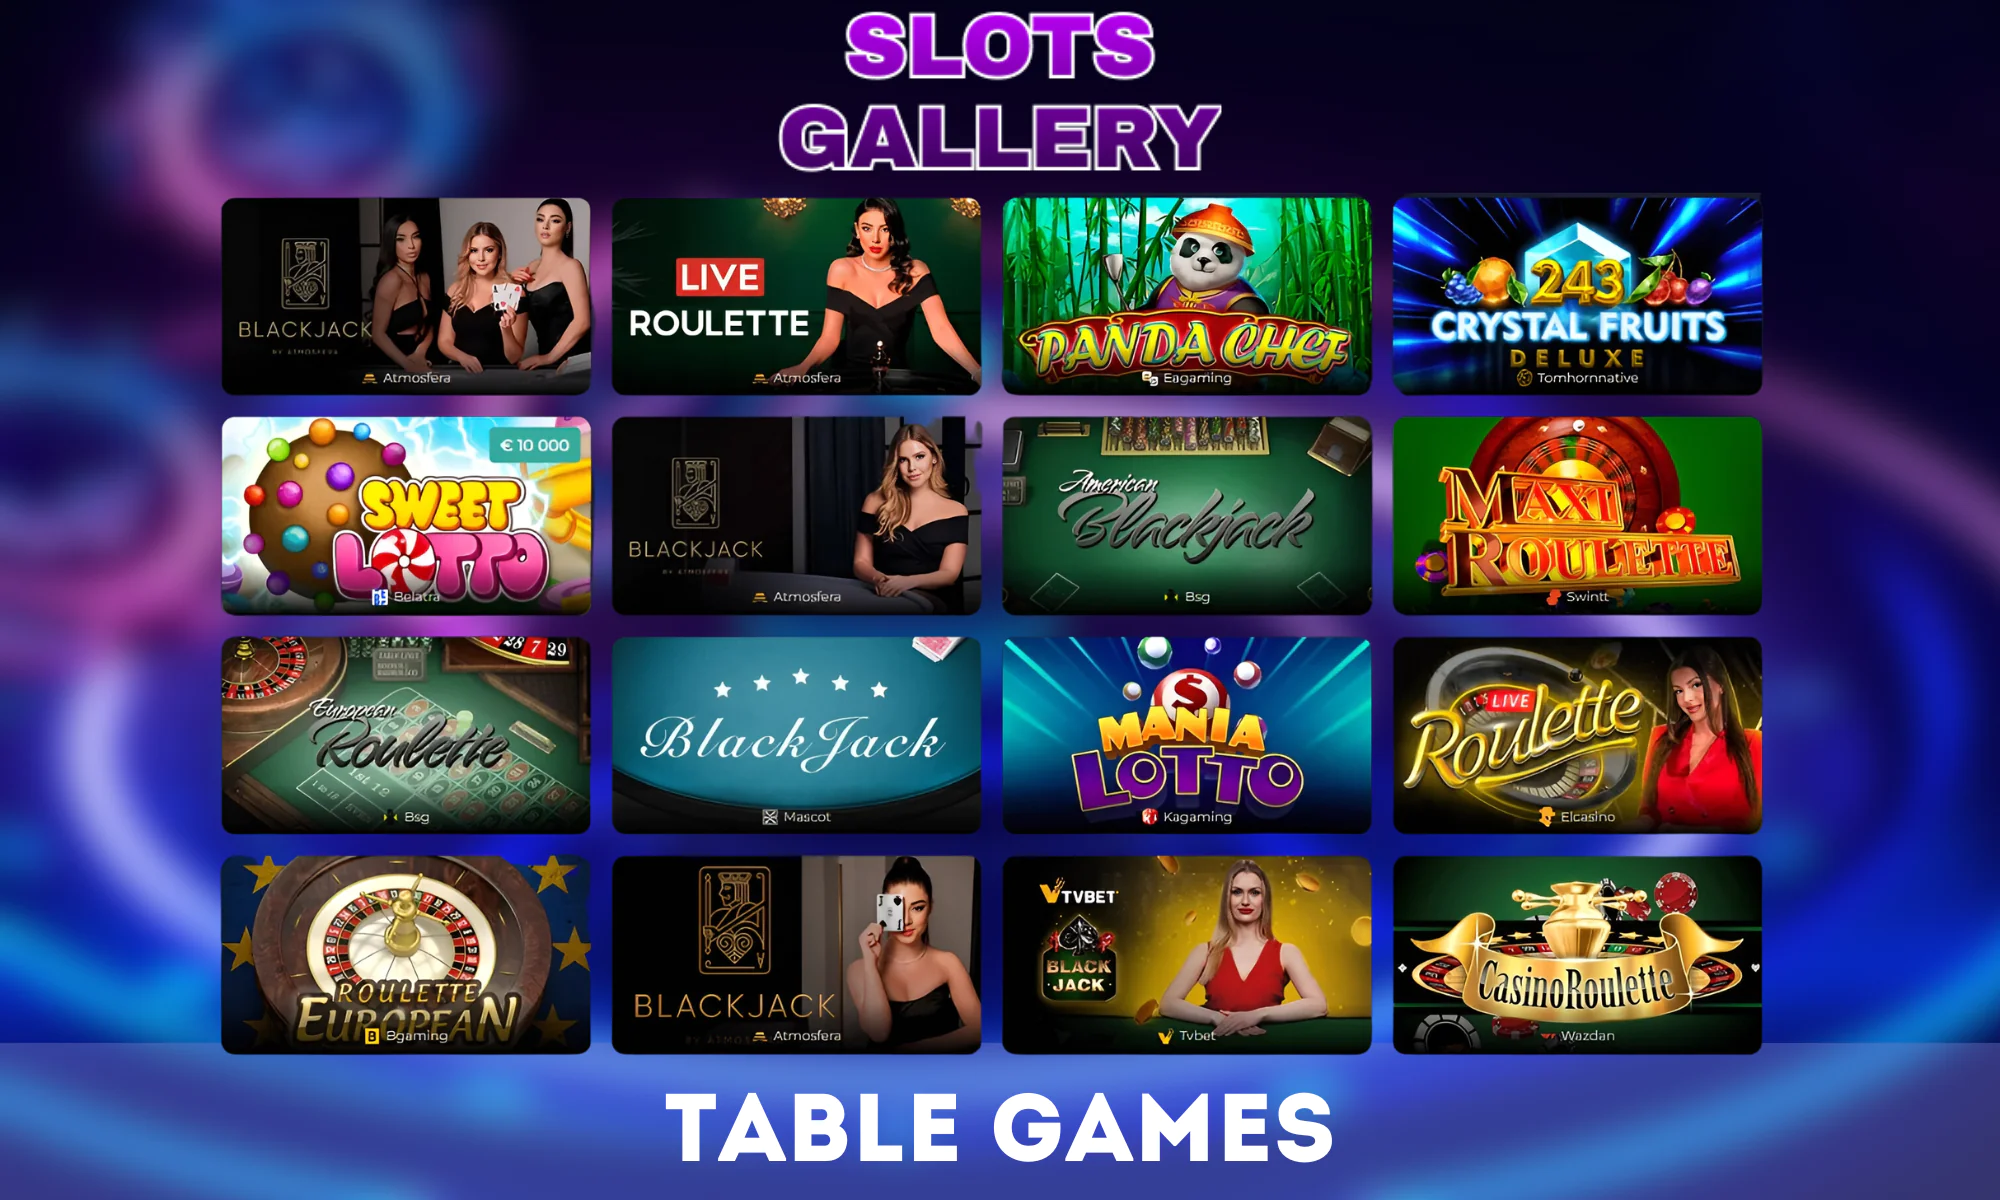 There are more than 600 games available in the Board Games category at Slots Gallery Casino